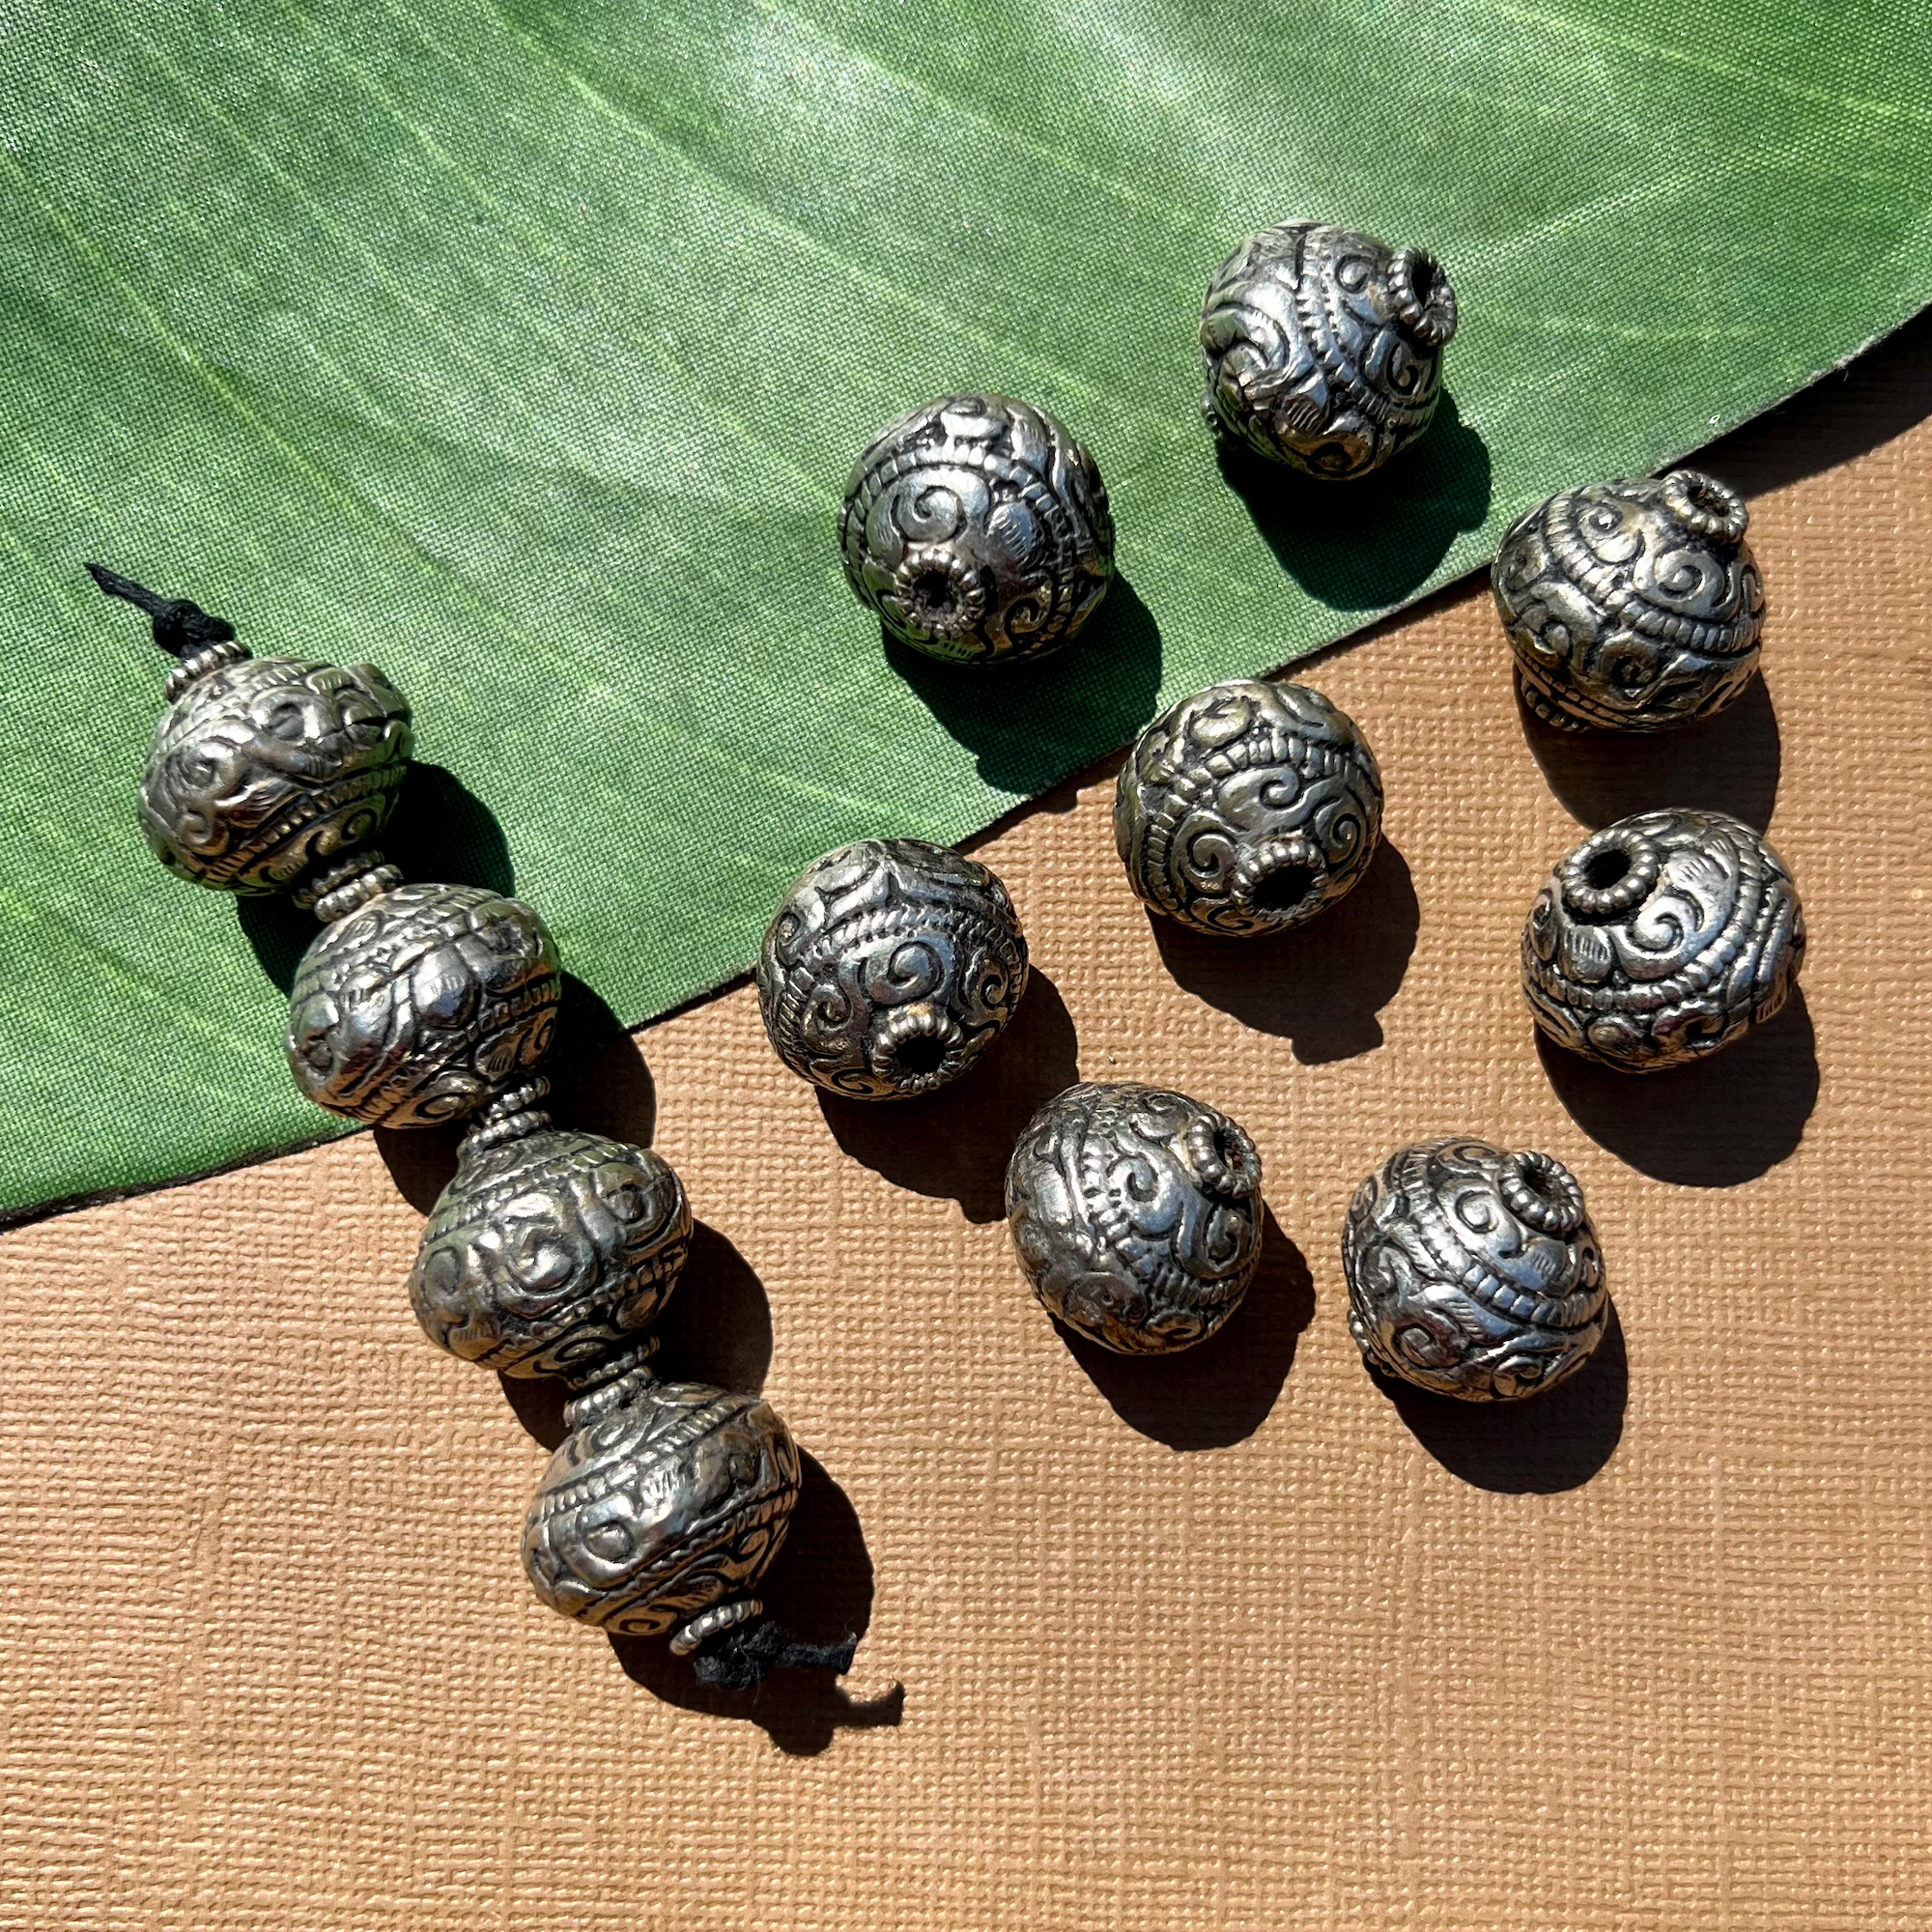 Small 20mm Carved Round Metal Beads - 4 Pieces